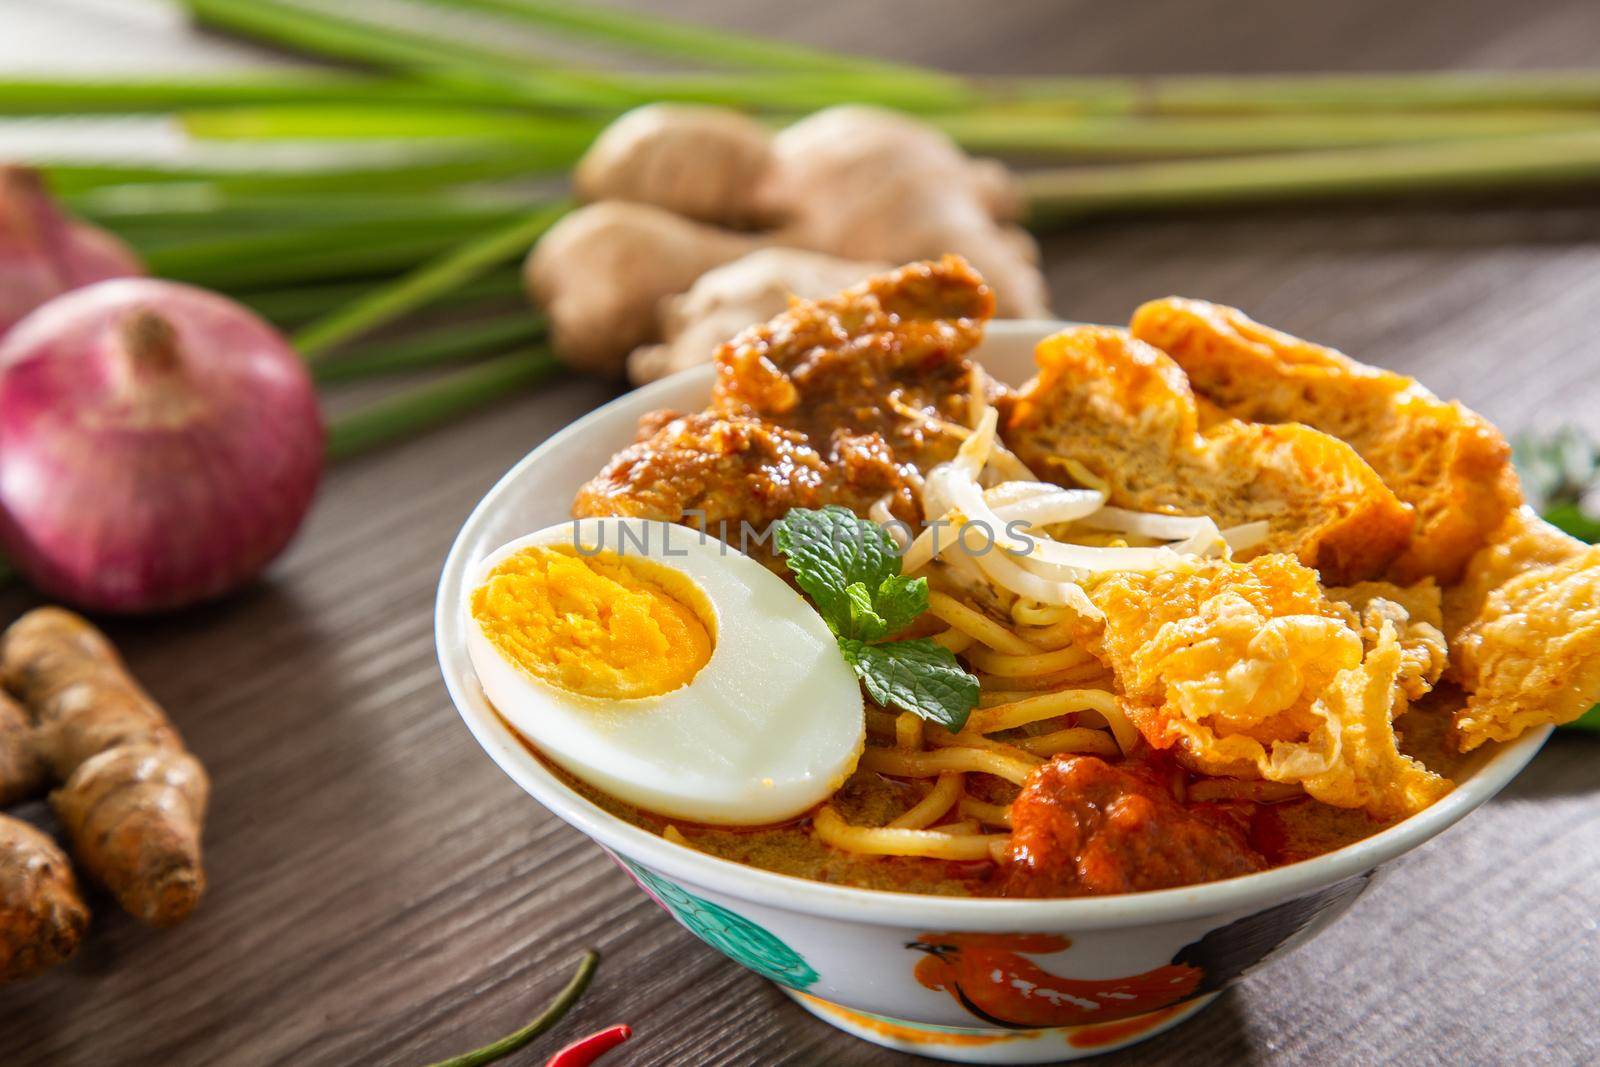 Curry Laksa which is a popular traditional hot and spicy noodle soup from the culture in Malaysia. by tehcheesiong